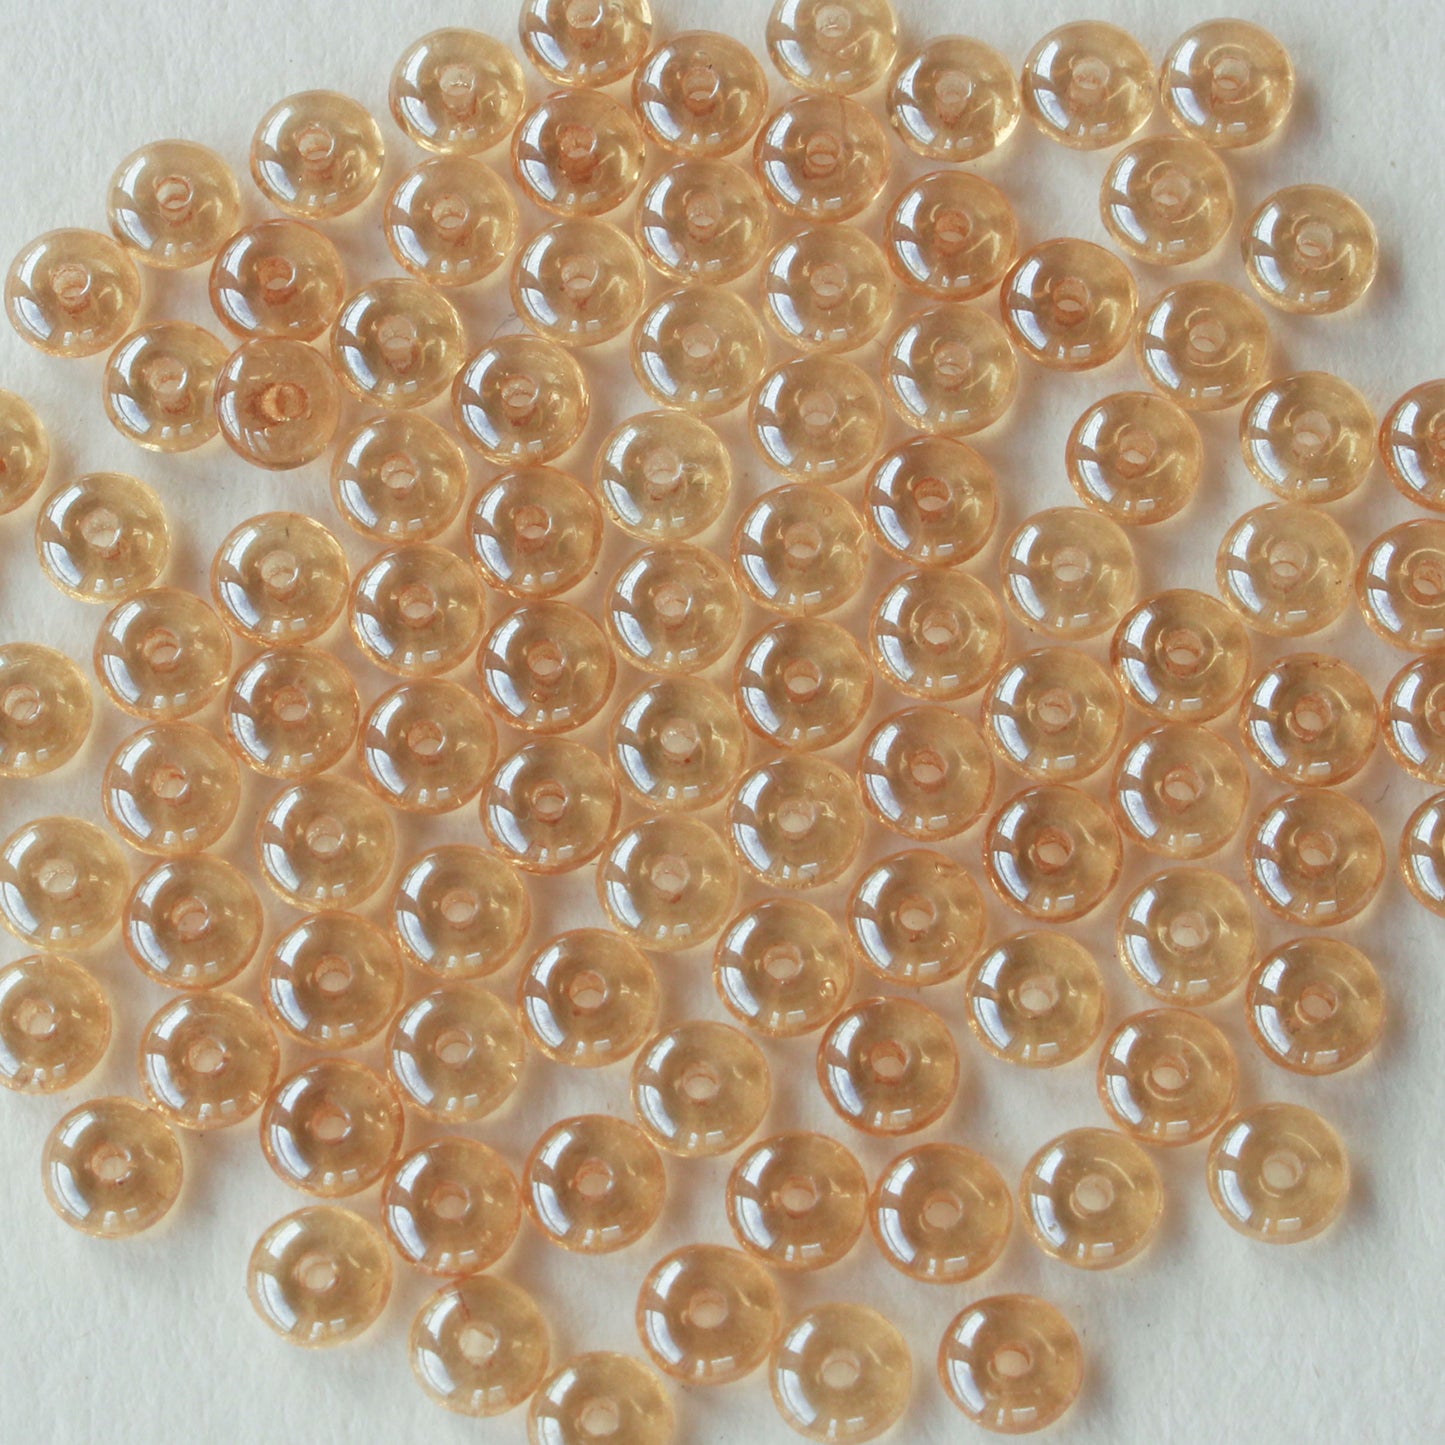 4mm Rondelle Beads - Champagne - 100 beads